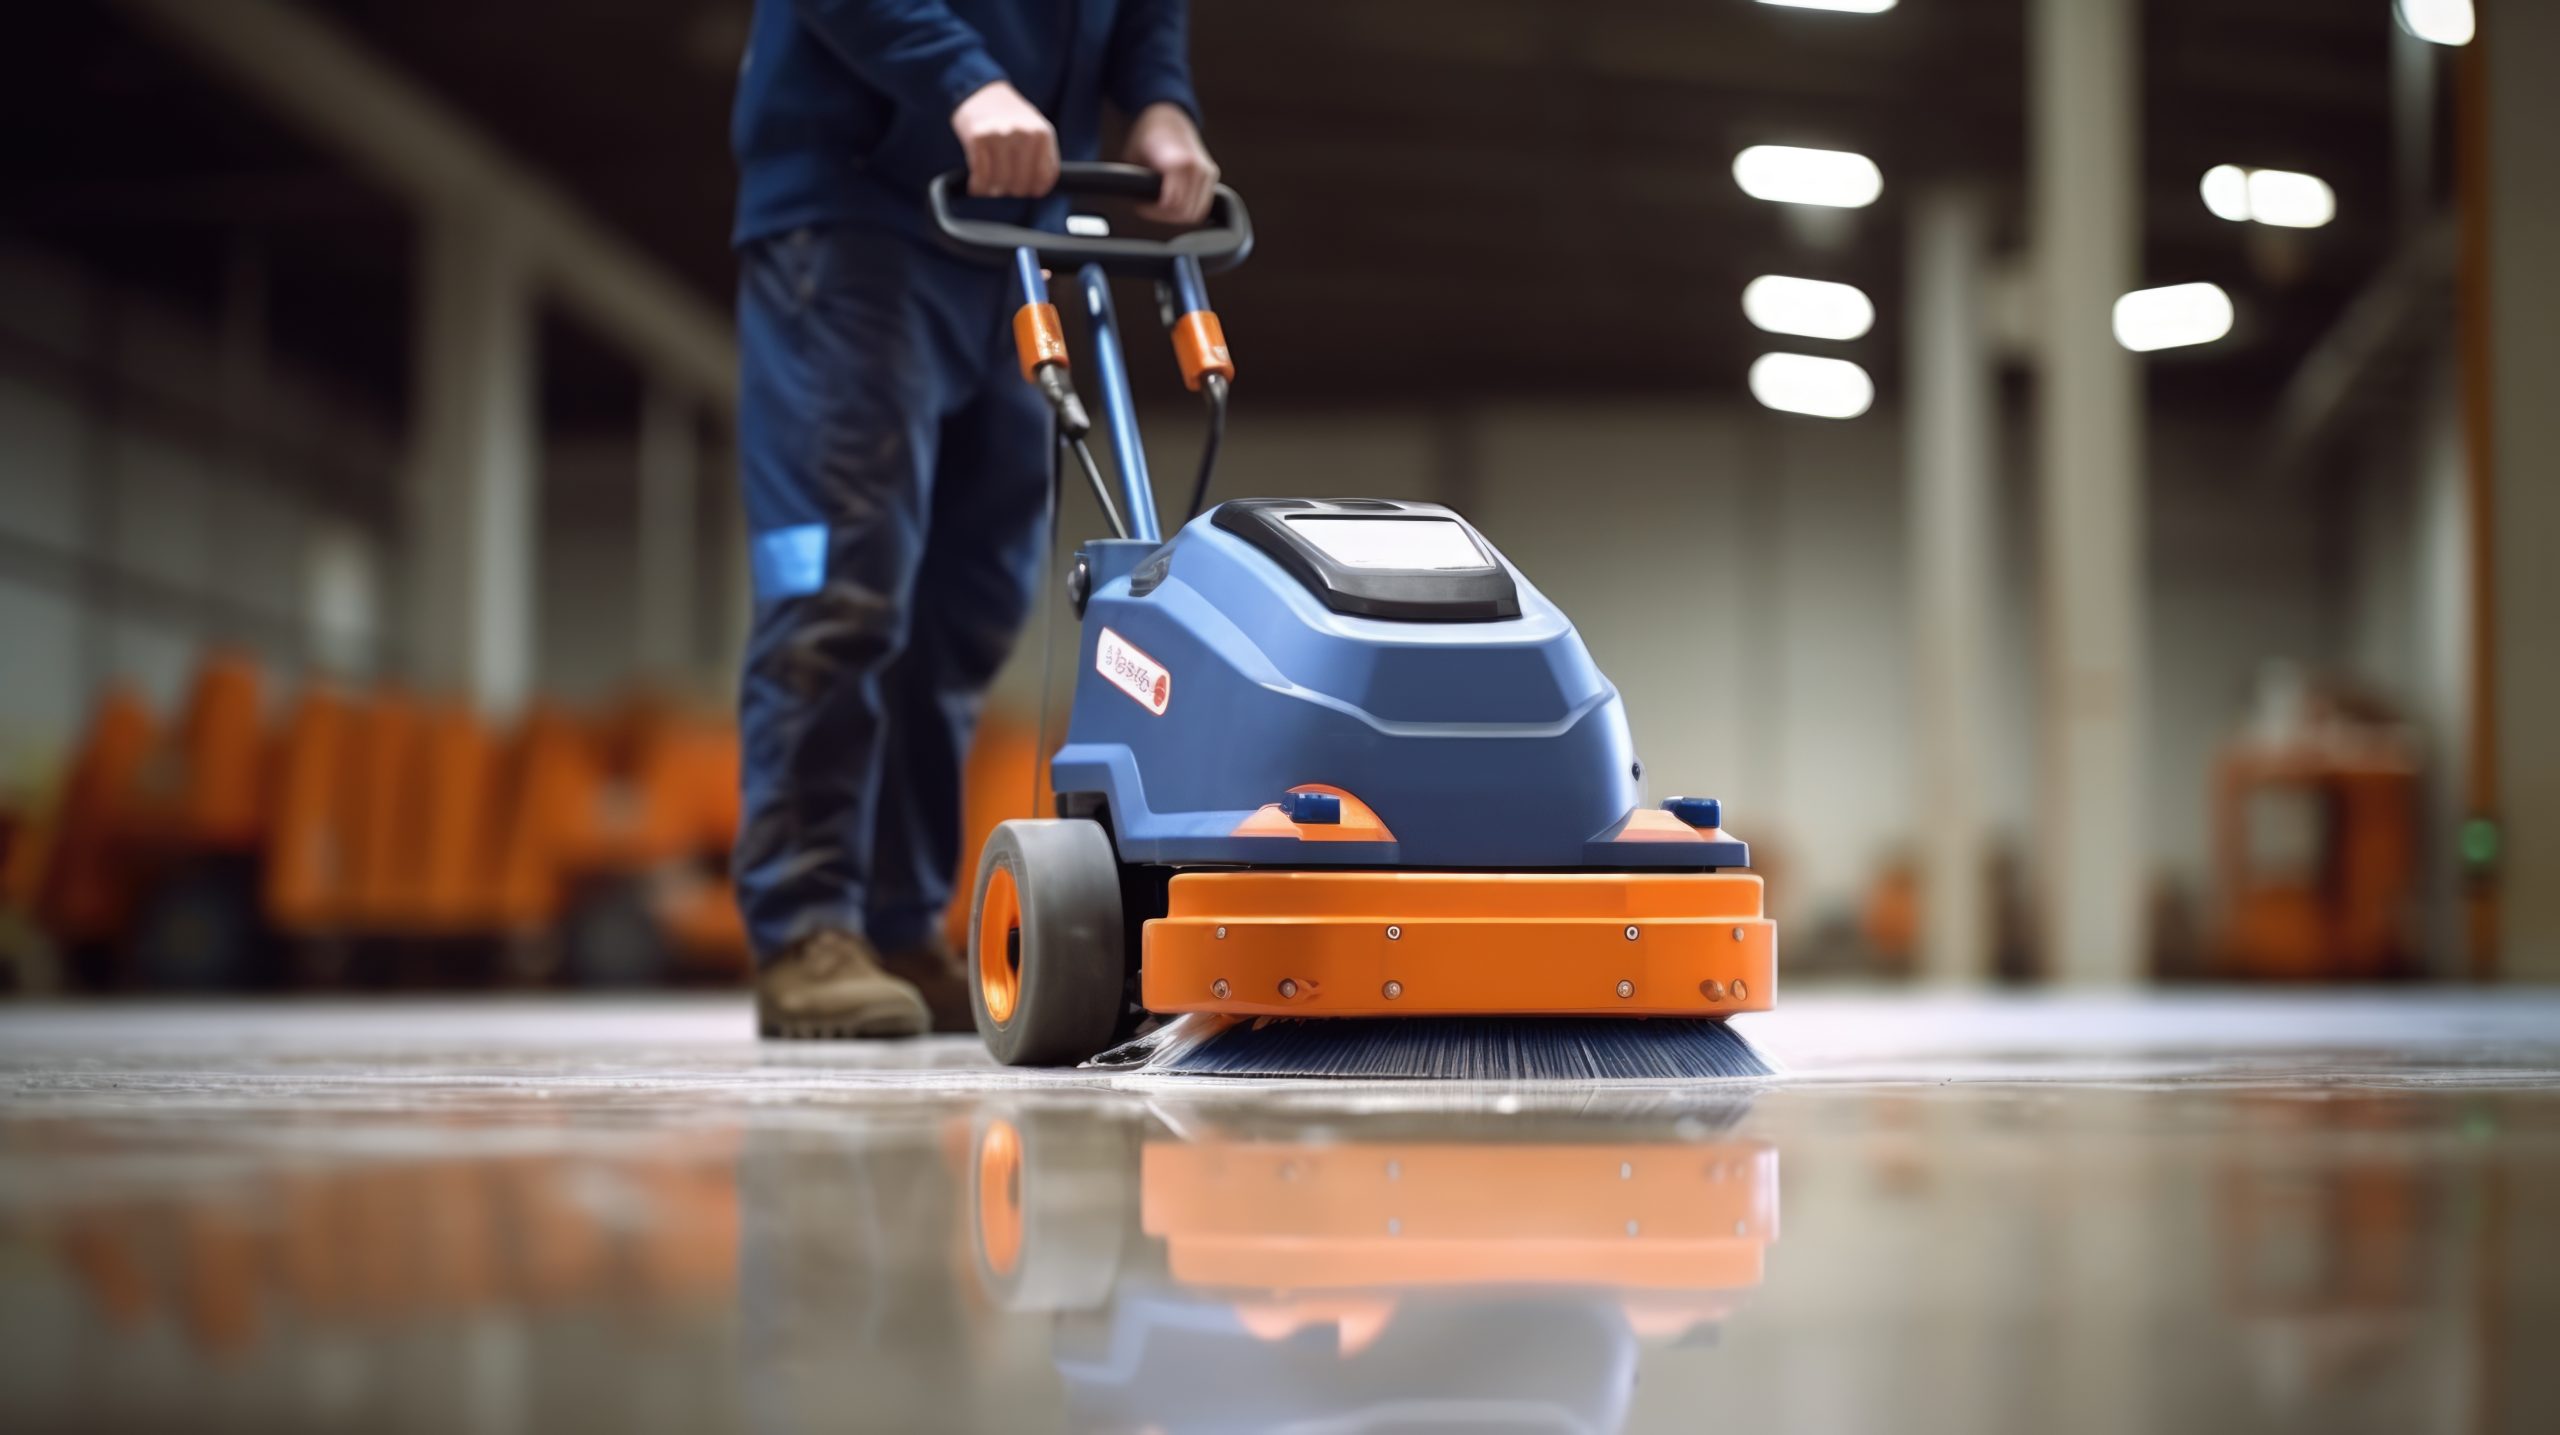 5 Questions to Ask Before Hiring a Tile Floor Cleaning Service